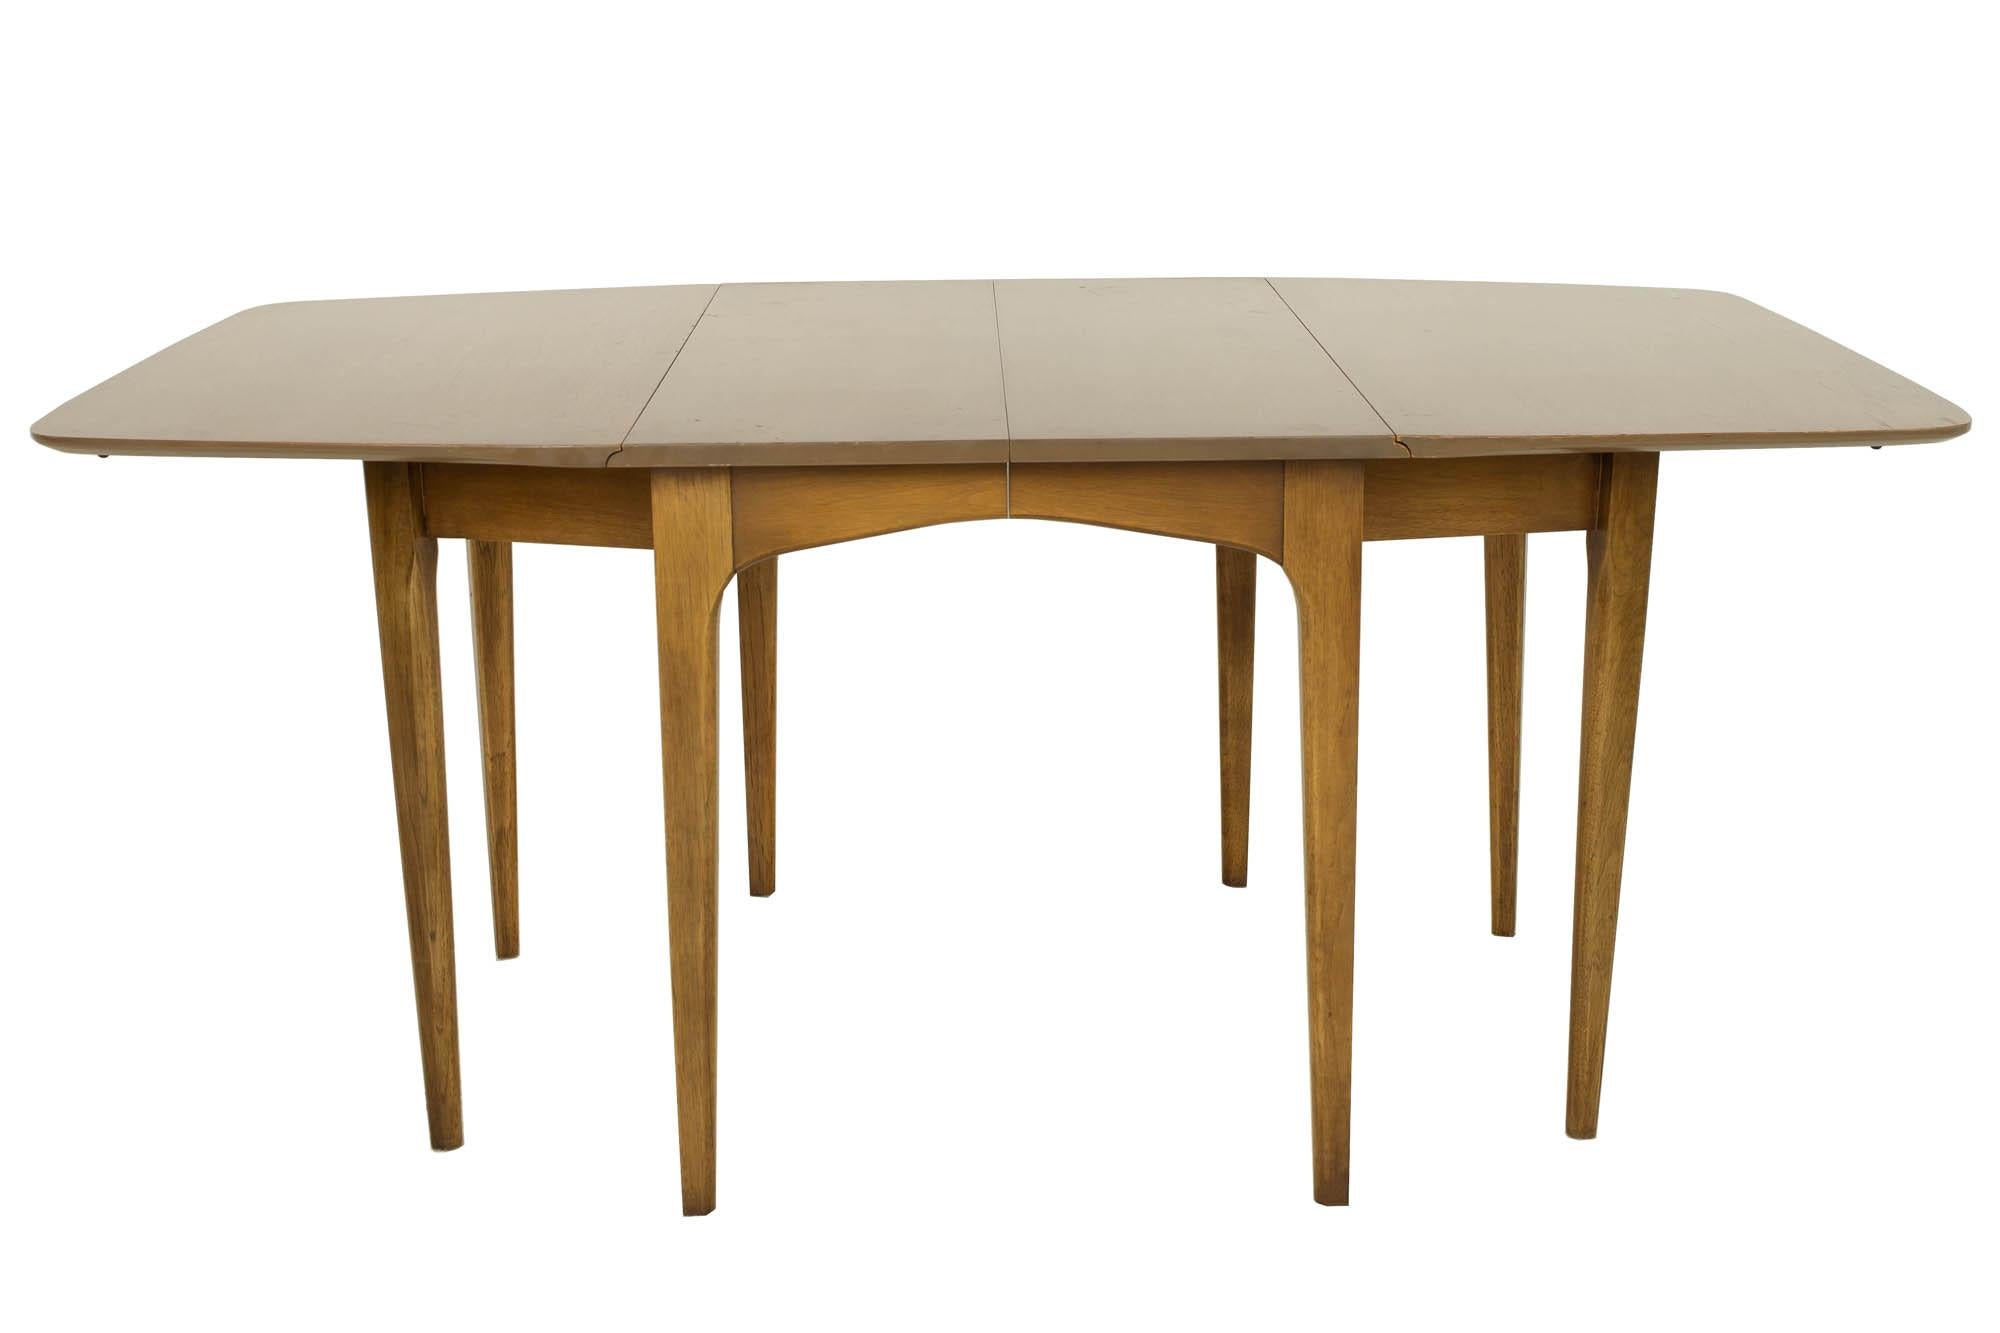 John Van Koert for Drexel mid century walnut drop leaf dining table

This table measures: 71 wide x 42 deep x 30 inches high, each table leaf measures 12 wide making the table 107 inches wide, with a chair clearance of 26.25 inches

?All pieces